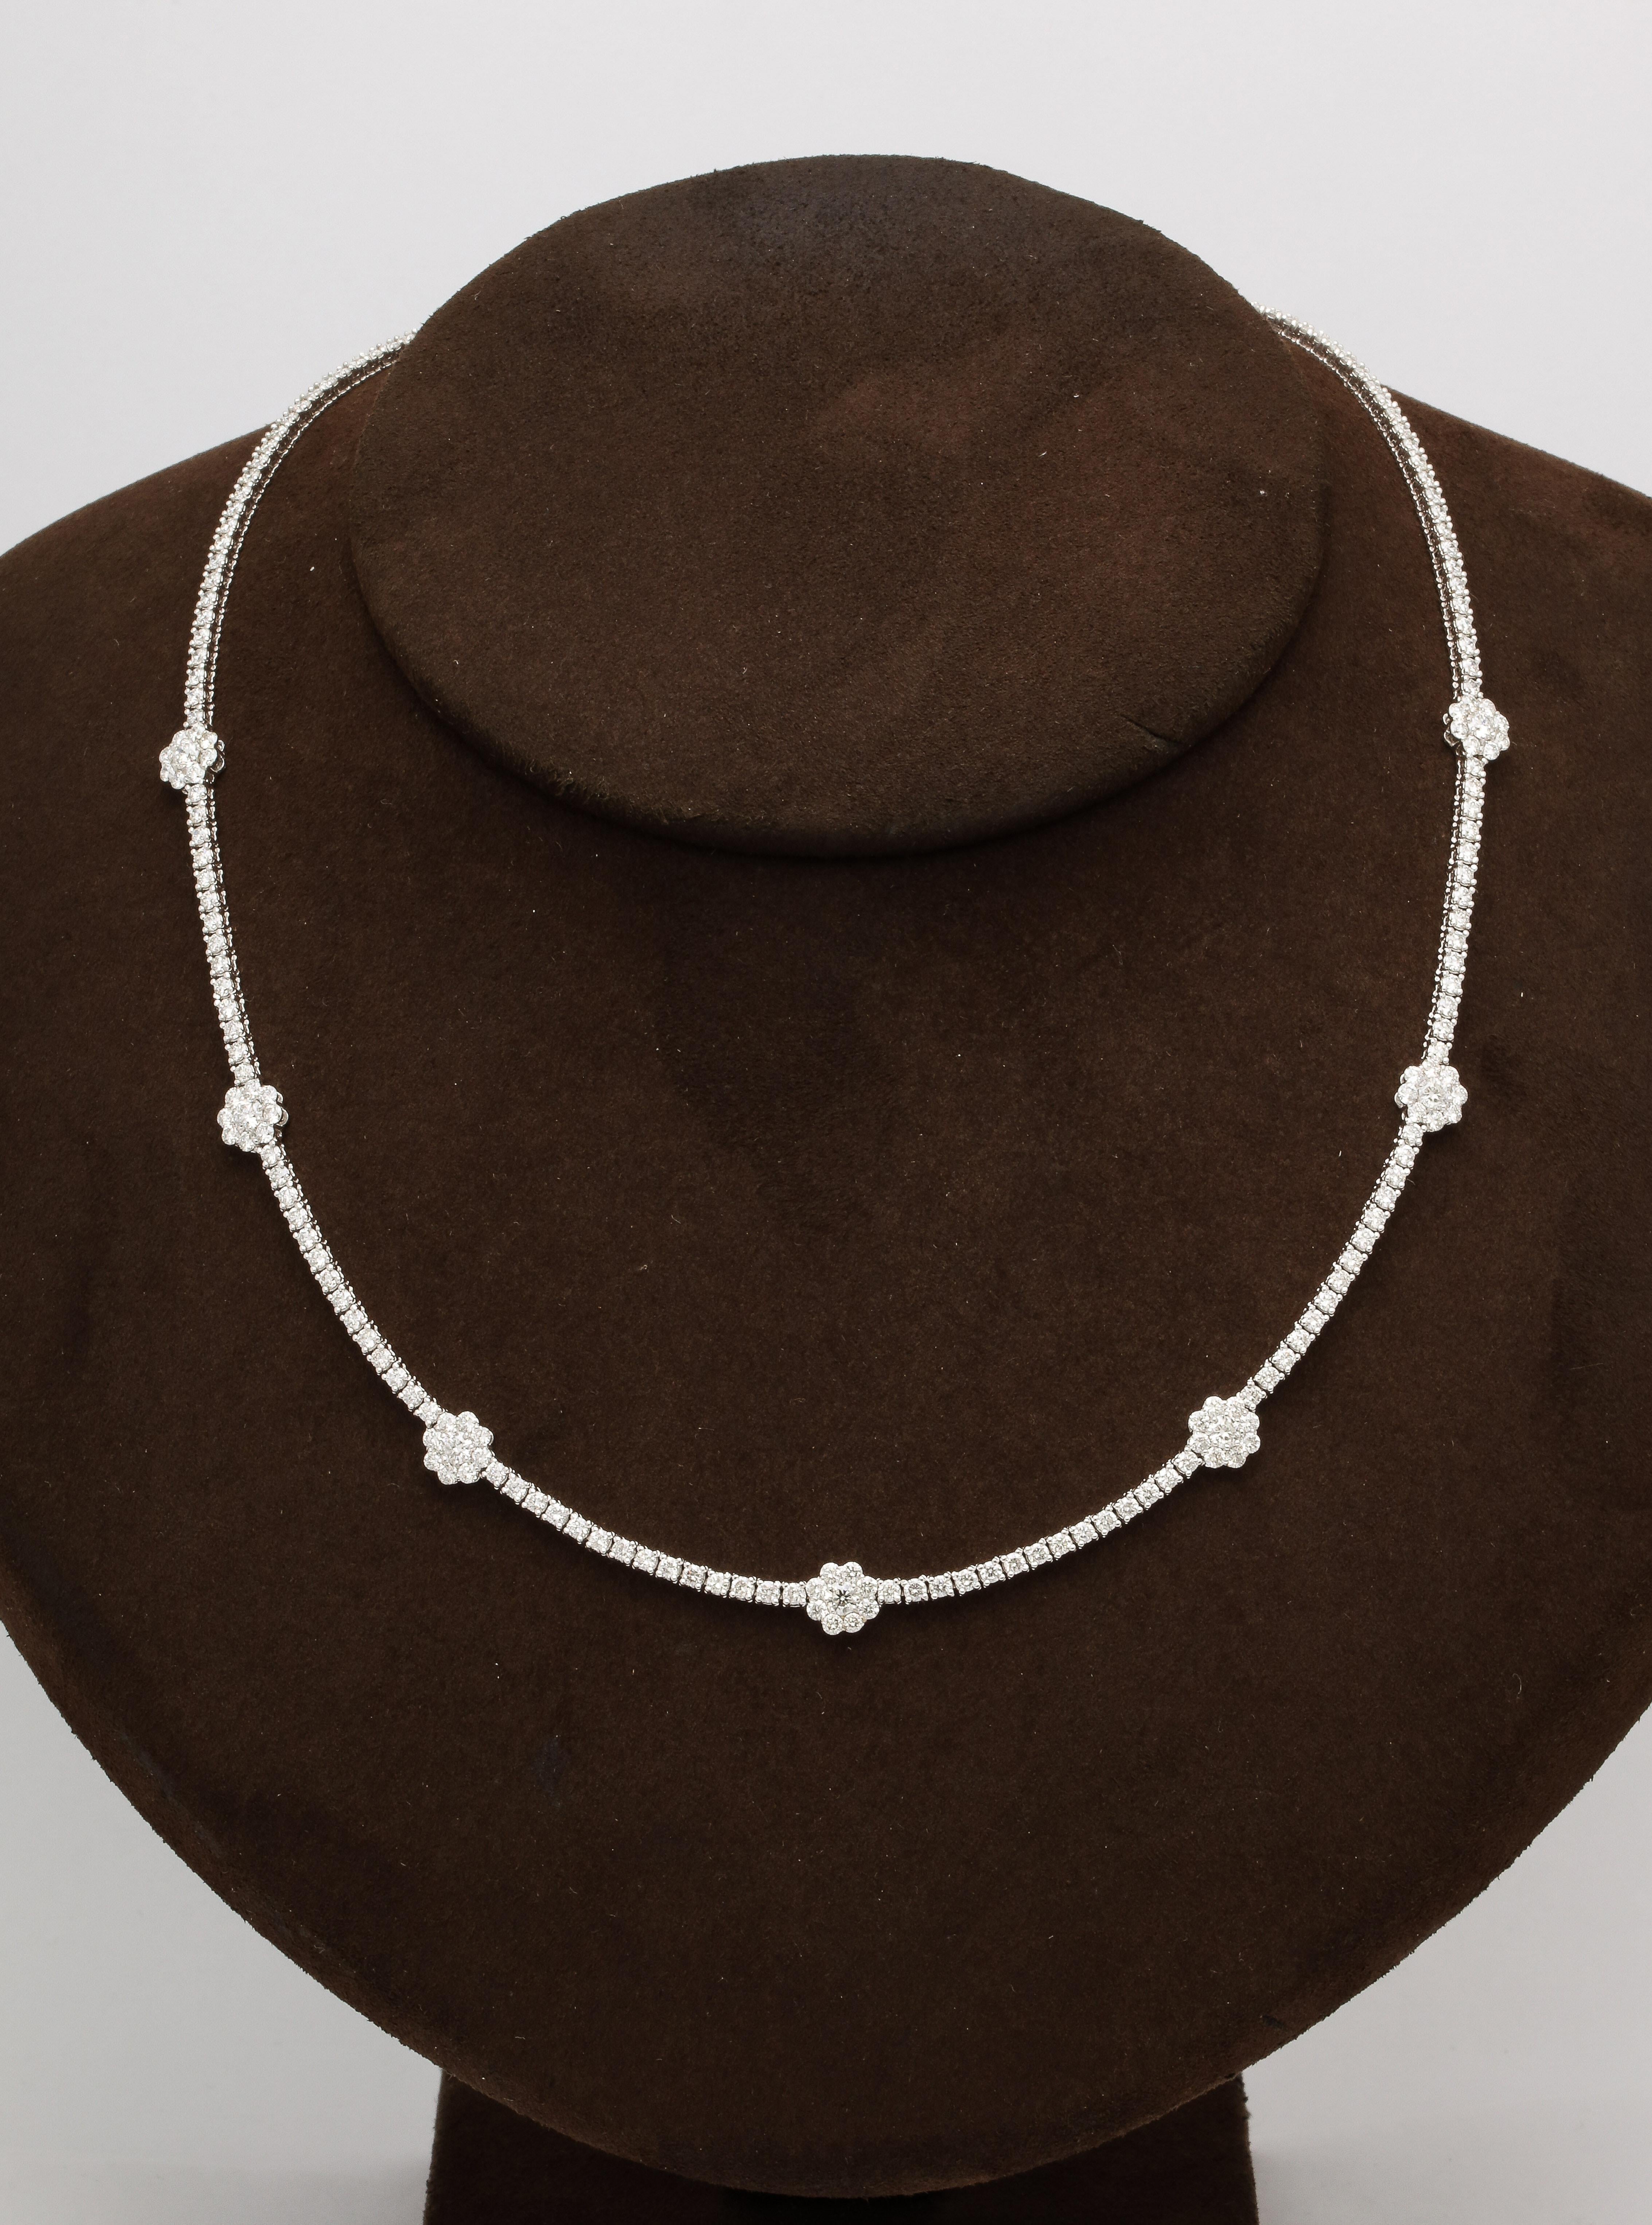 
6.75 carats of white round brilliant cut diamonds. This tennis necklace features 7 flower motifs. Set in 14k white gold. 

Looks beautiful on its own or layered with other pieces. 

17 inch length 

A matching bracelet is available in our 1stDibs